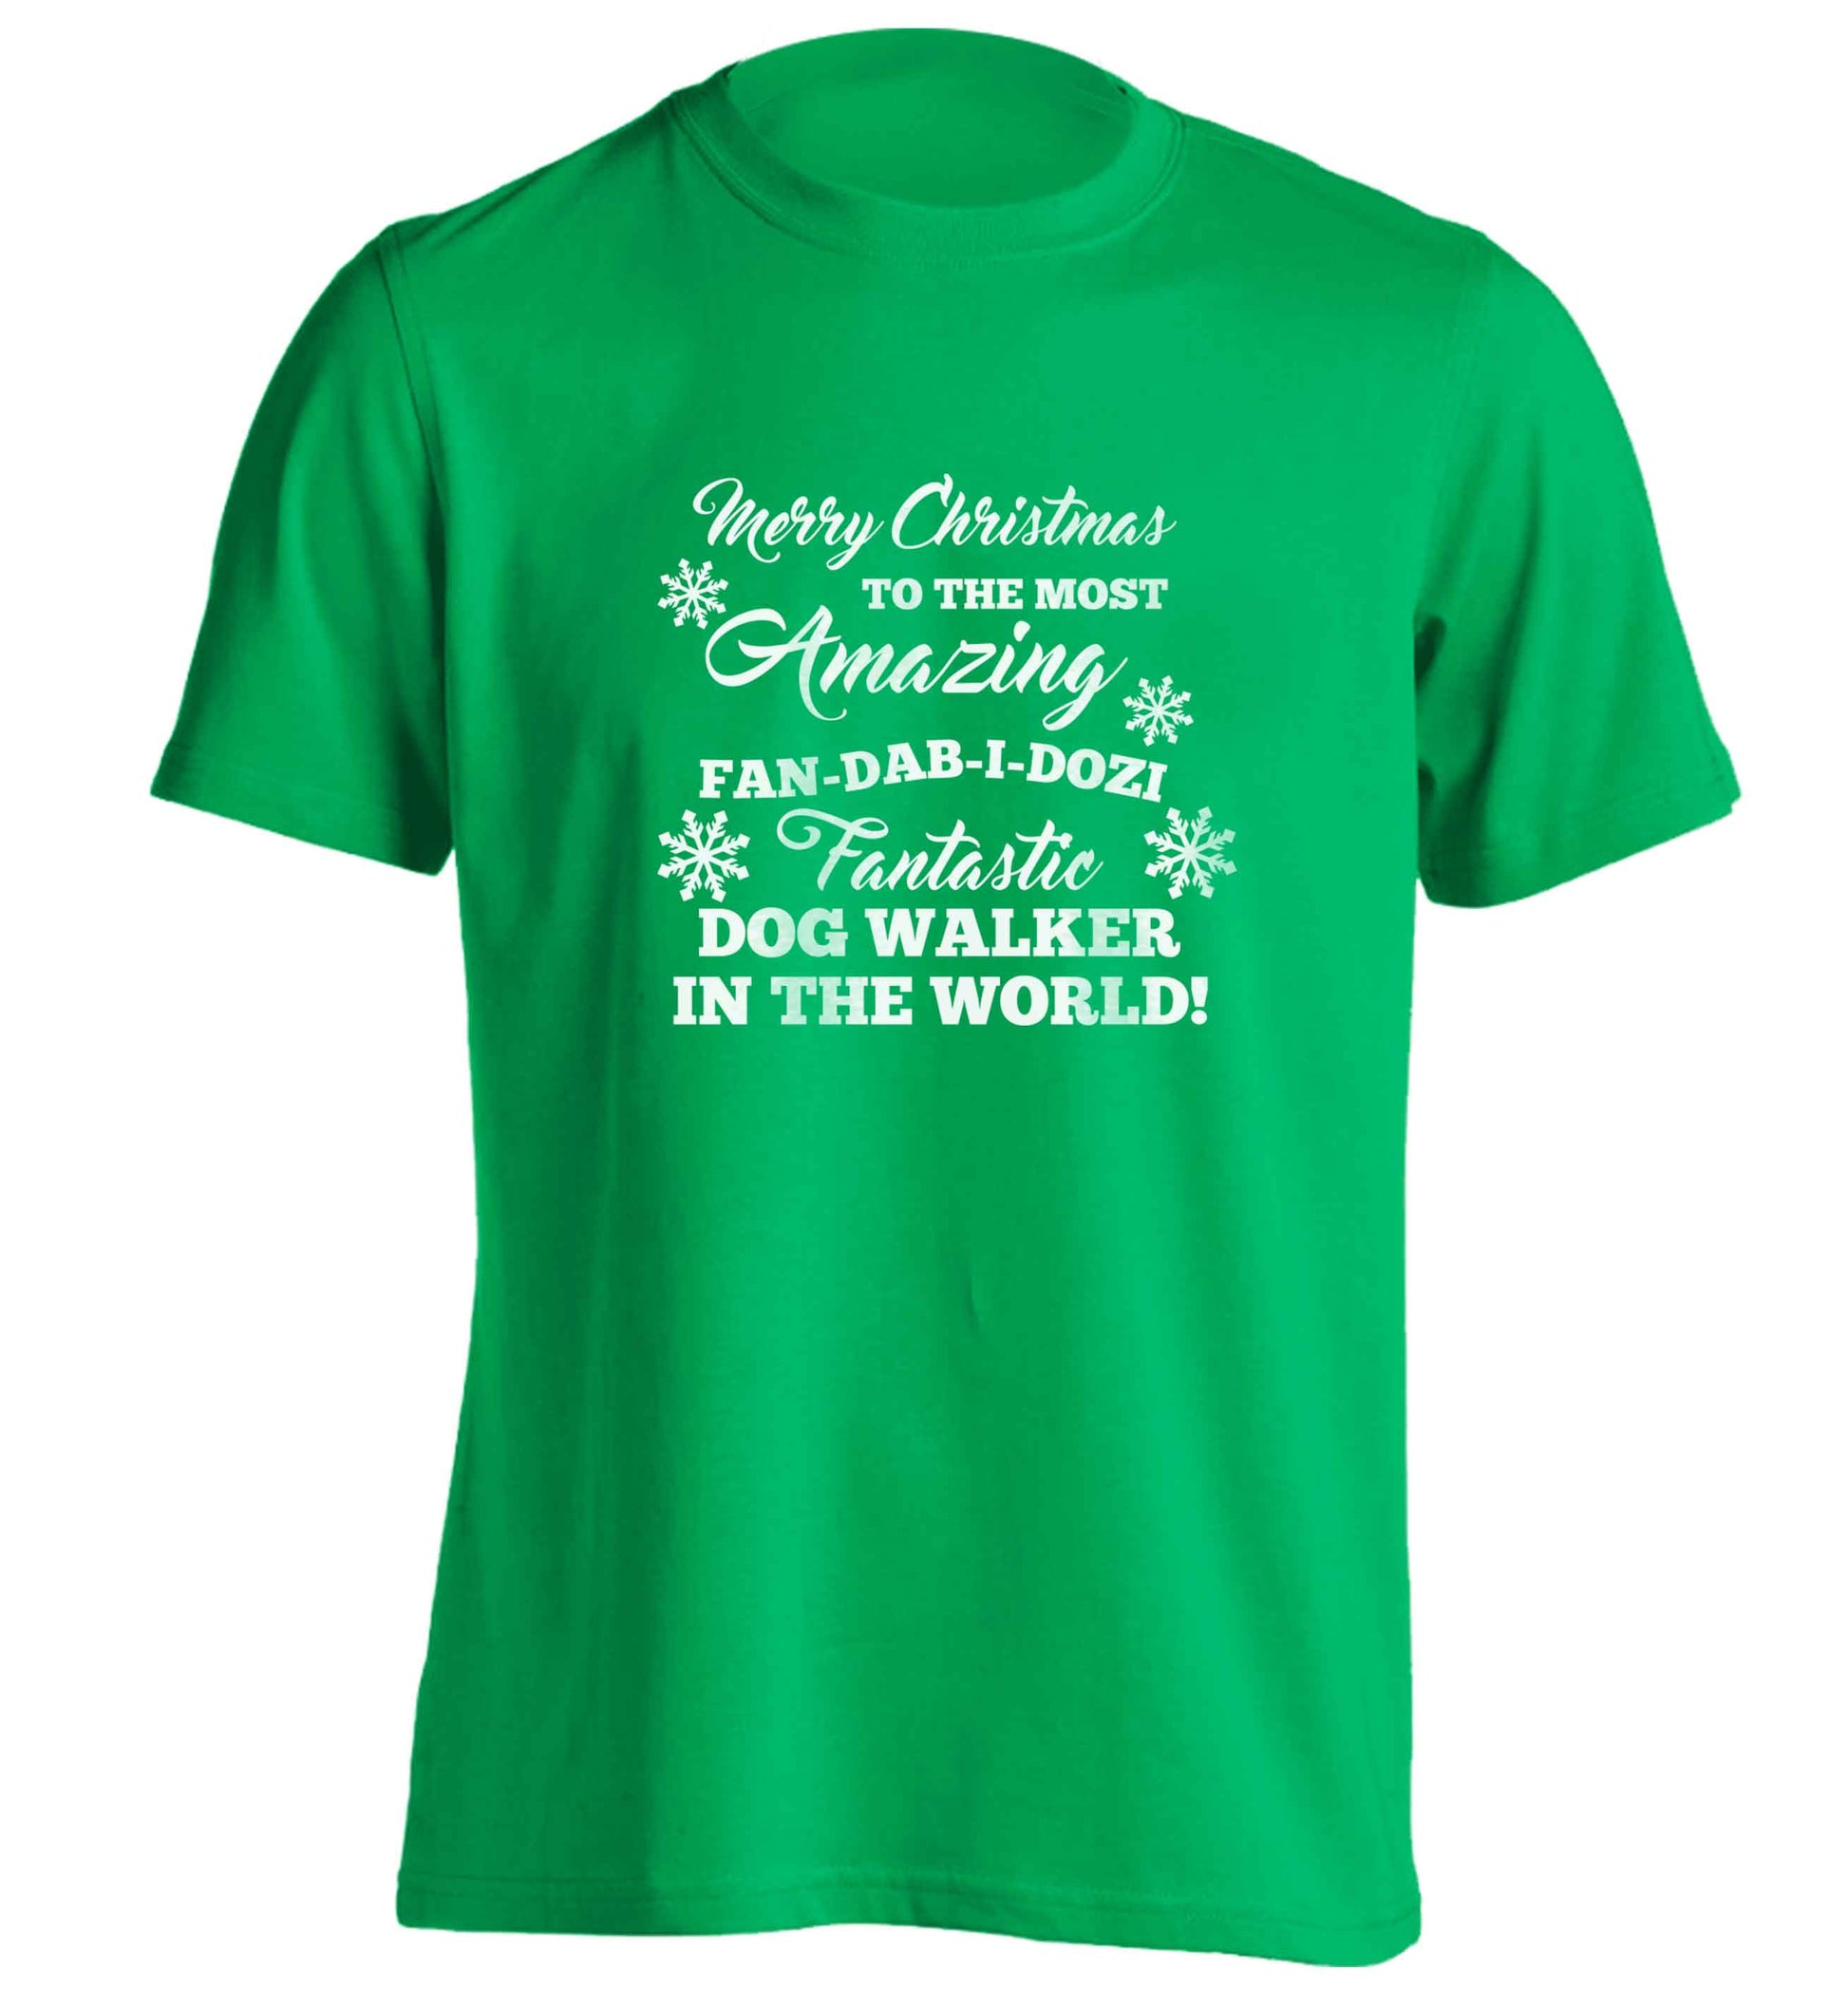 Merry Christmas to the most amazing fan-dab-i-dozi fantasic dog walker in the world adults unisex green Tshirt 2XL